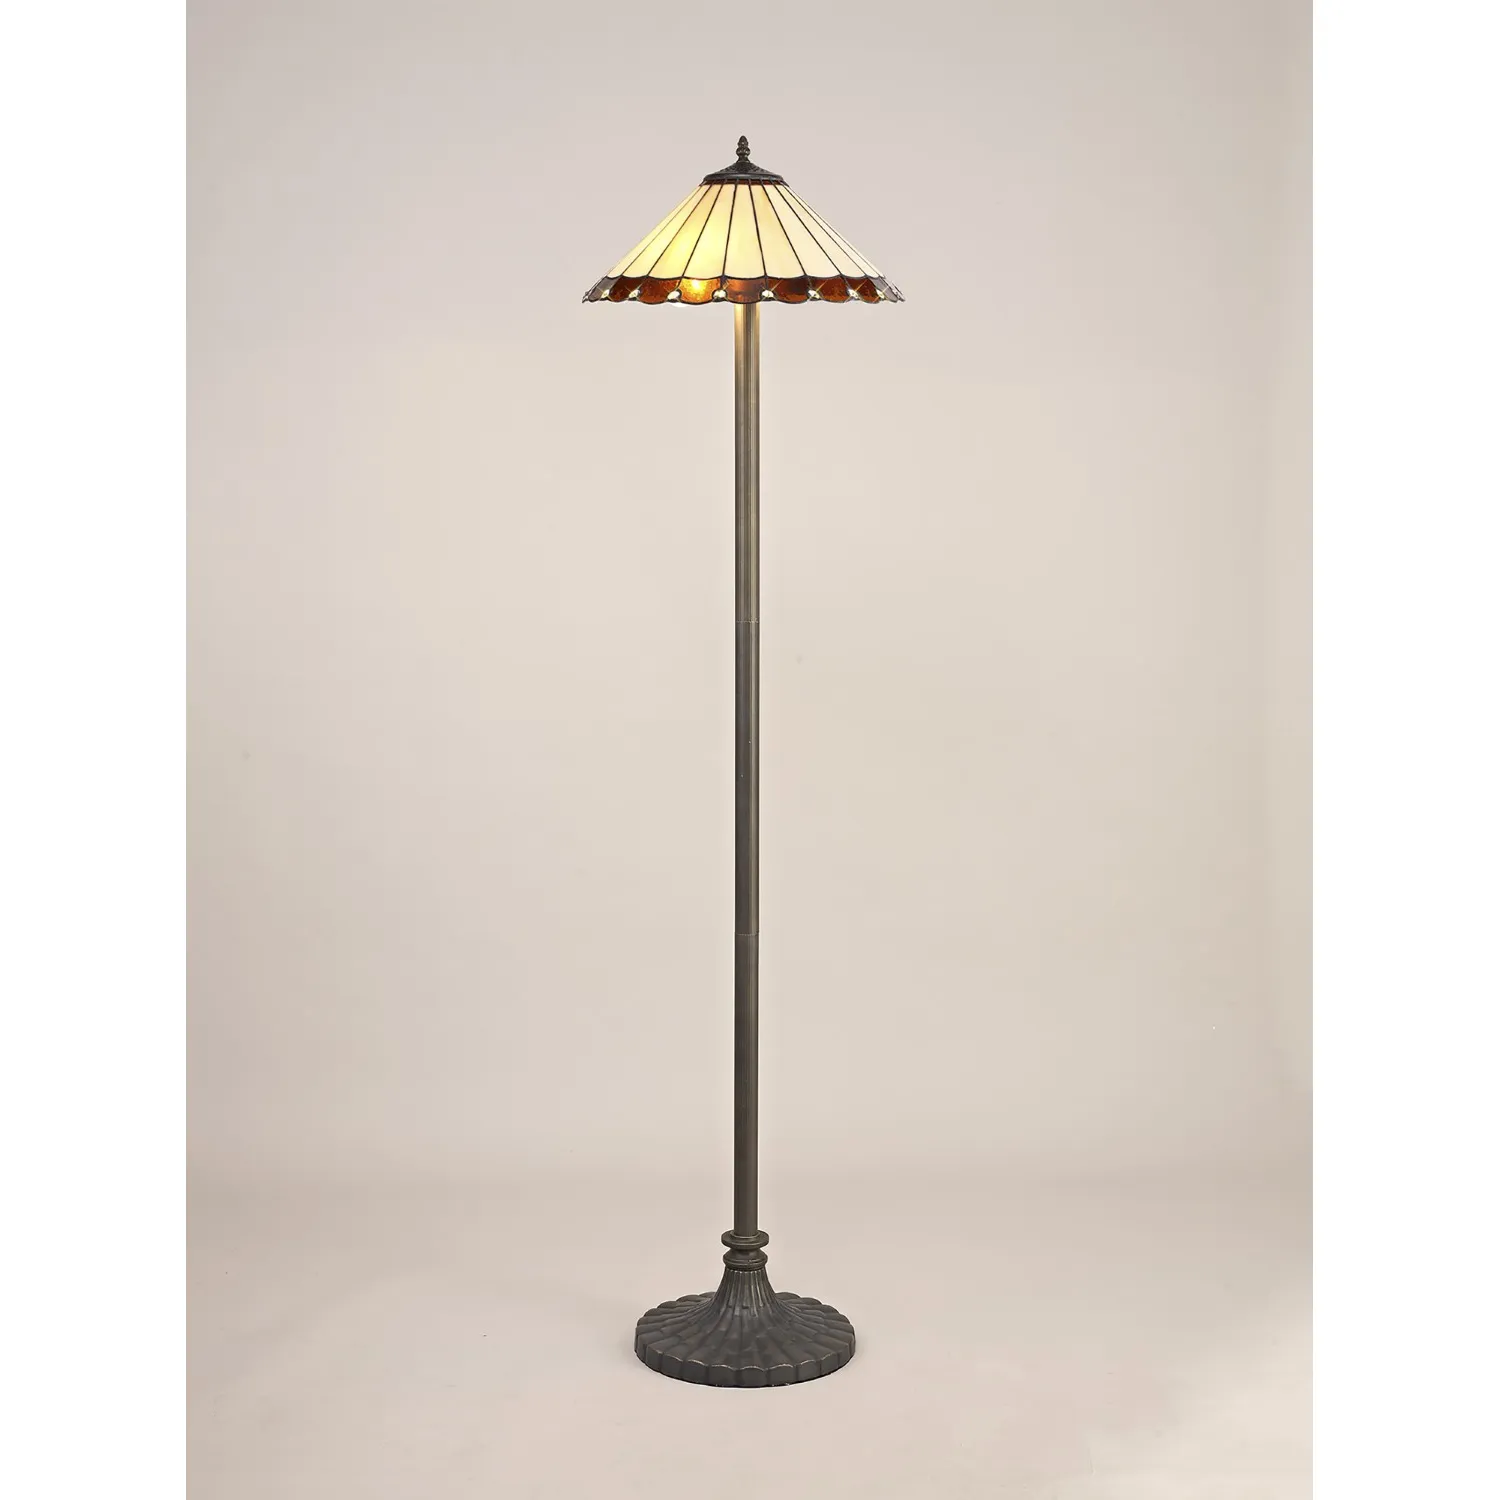 Ware 2 Light Stepped Design Floor Lamp E27 With 40cm Tiffany Shade, Amber Cream Crystal Aged Antique Brass